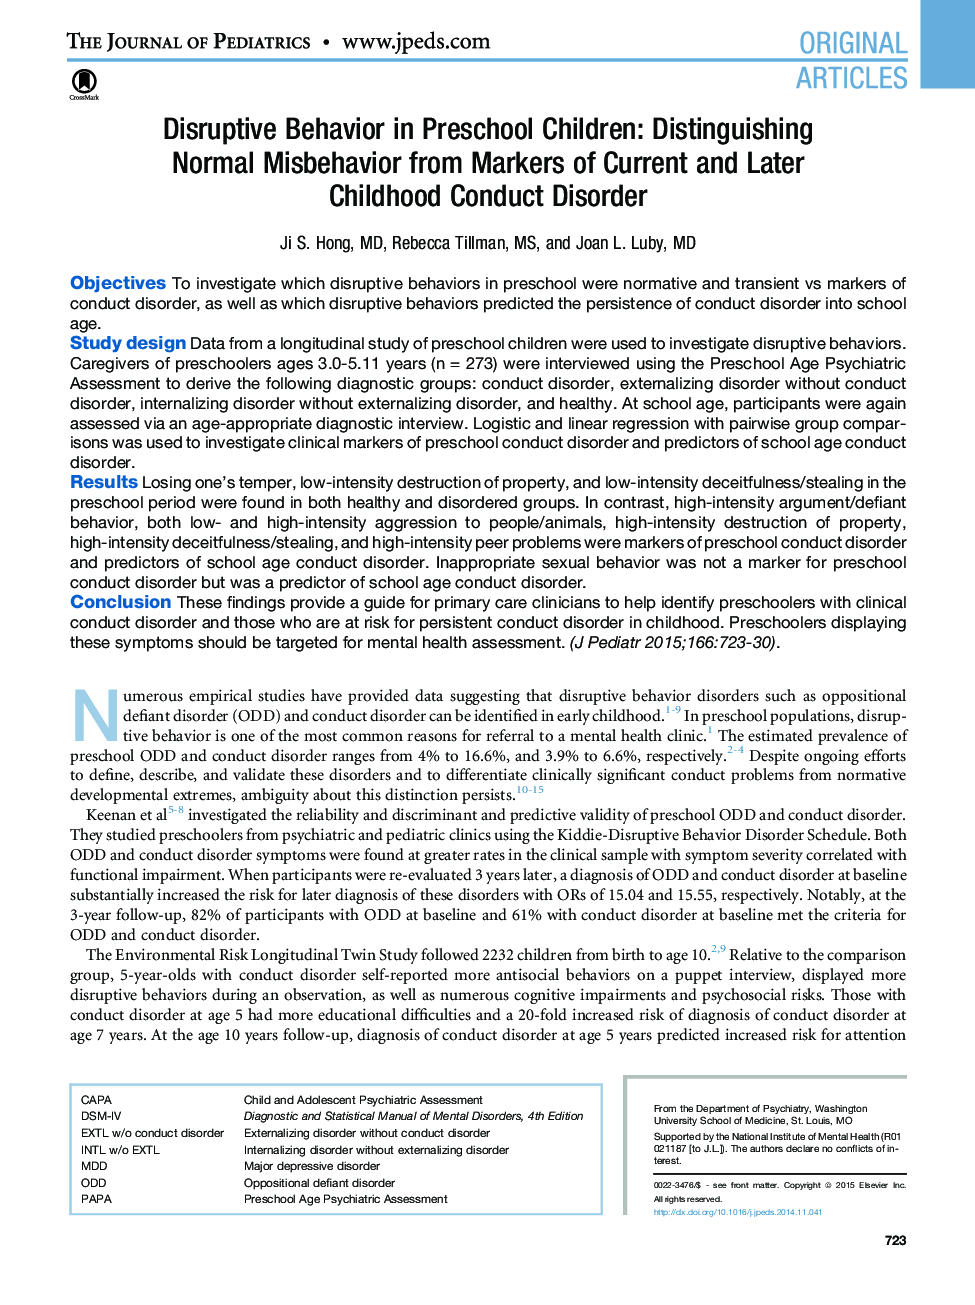 Disruptive Behavior in Preschool Children: Distinguishing NormalÂ Misbehavior from Markers of Current and Later ChildhoodÂ ConductÂ Disorder